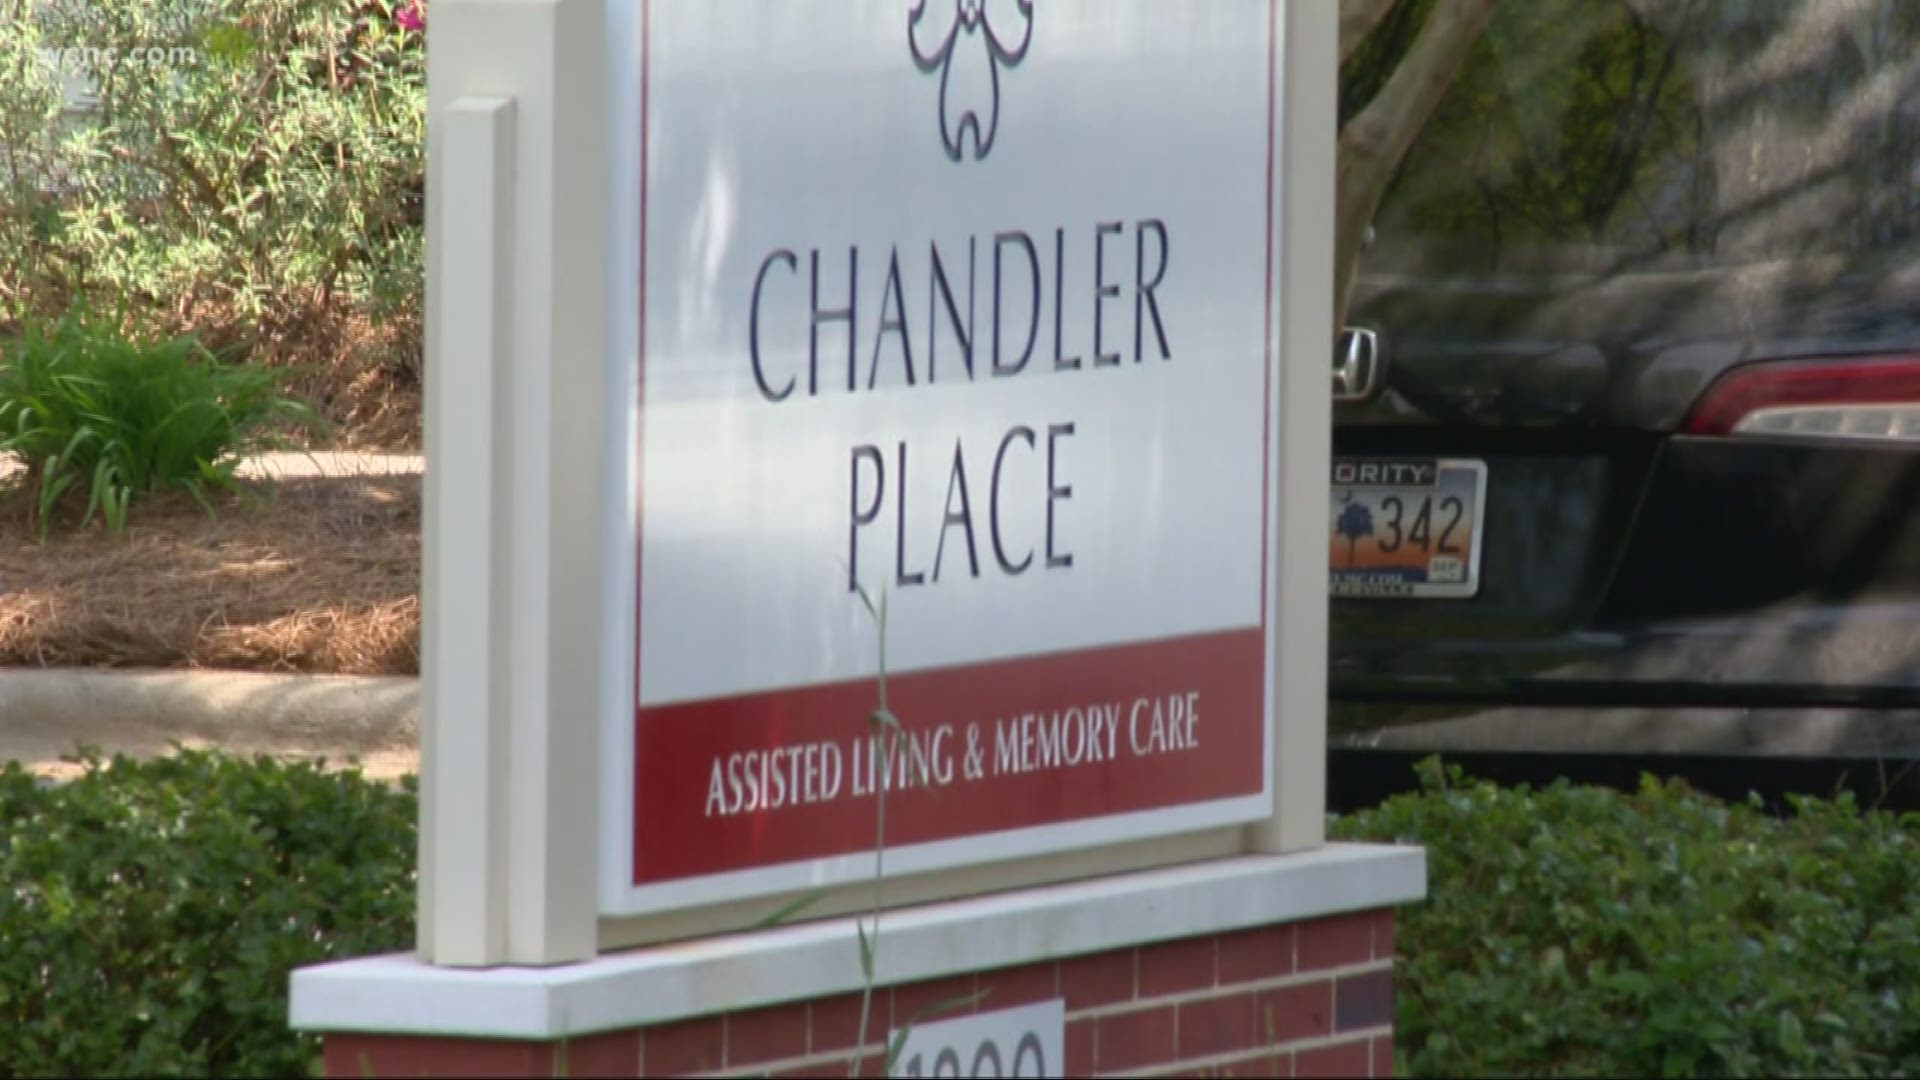 Two cases were confirmed at a Rock Hill assisted living facility over the weekend. One is a resident with no symptoms, the other is an employee.